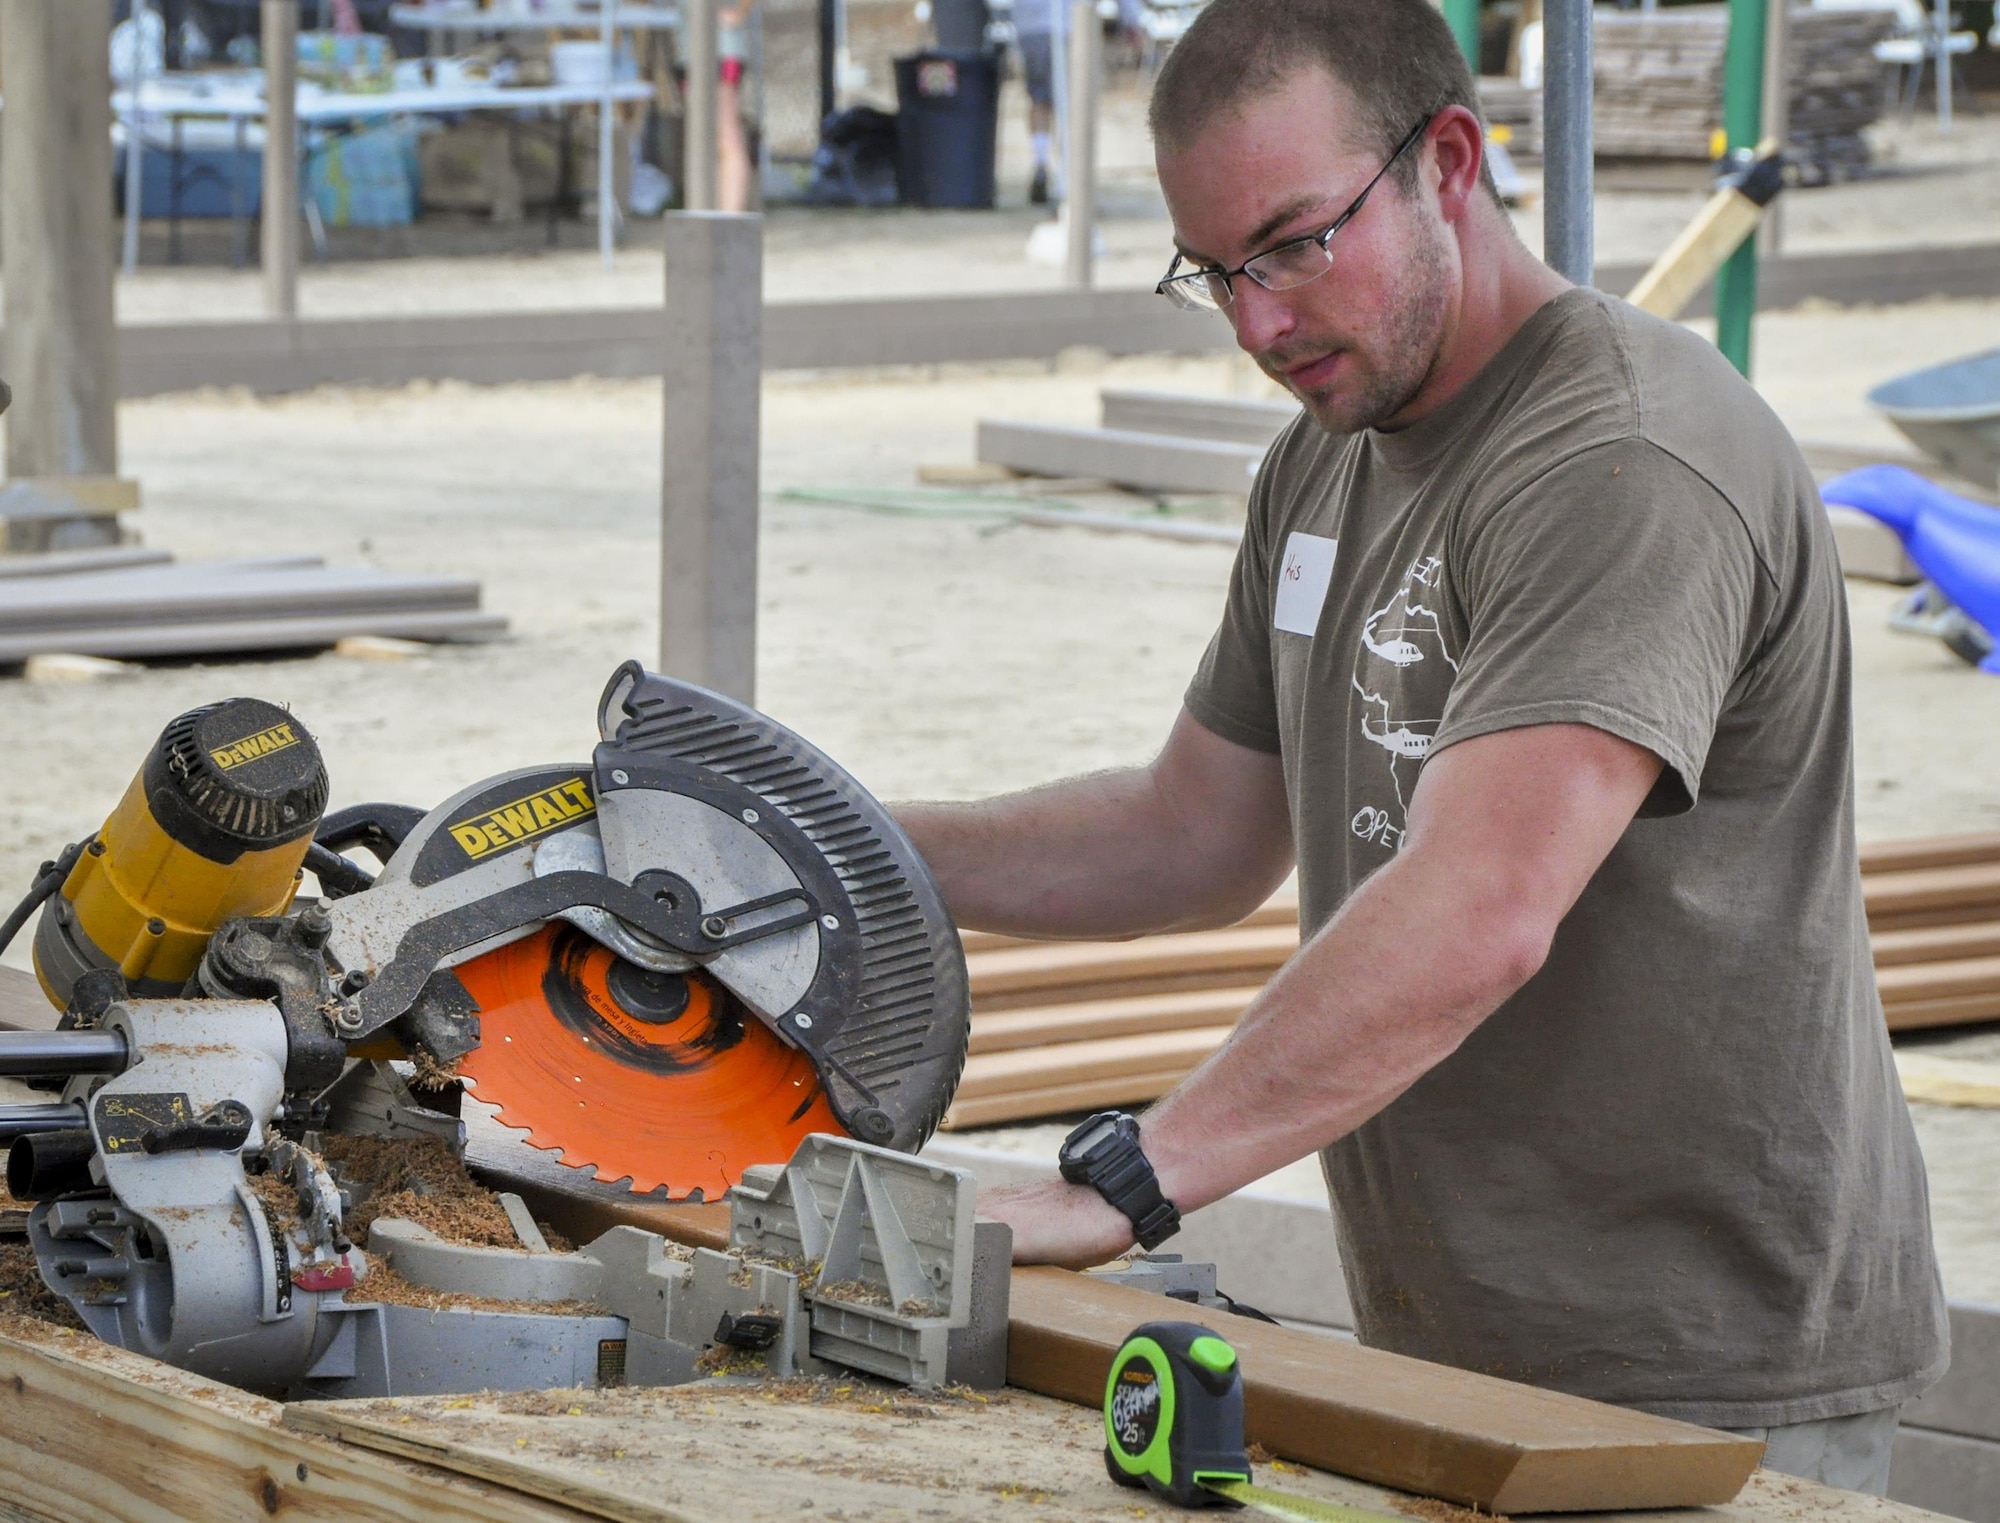 Staff Sgt. Kristopher Golden, 919th Special Operations Aircraft Maintenance Squadron, uses a circular saw to cut wood plank sections at the Emerald Coast Autism Center in Niceville, Fla. Aug. 26.   Golden and more than 80 other 919th Special Operations Wing volunteers spent a week helping construct new playground and therapy equipment to benefit autistic and disabled students at the center on the campus of Northwest Florida State College.  (U.S. Air Force photo/Dan Neely) 